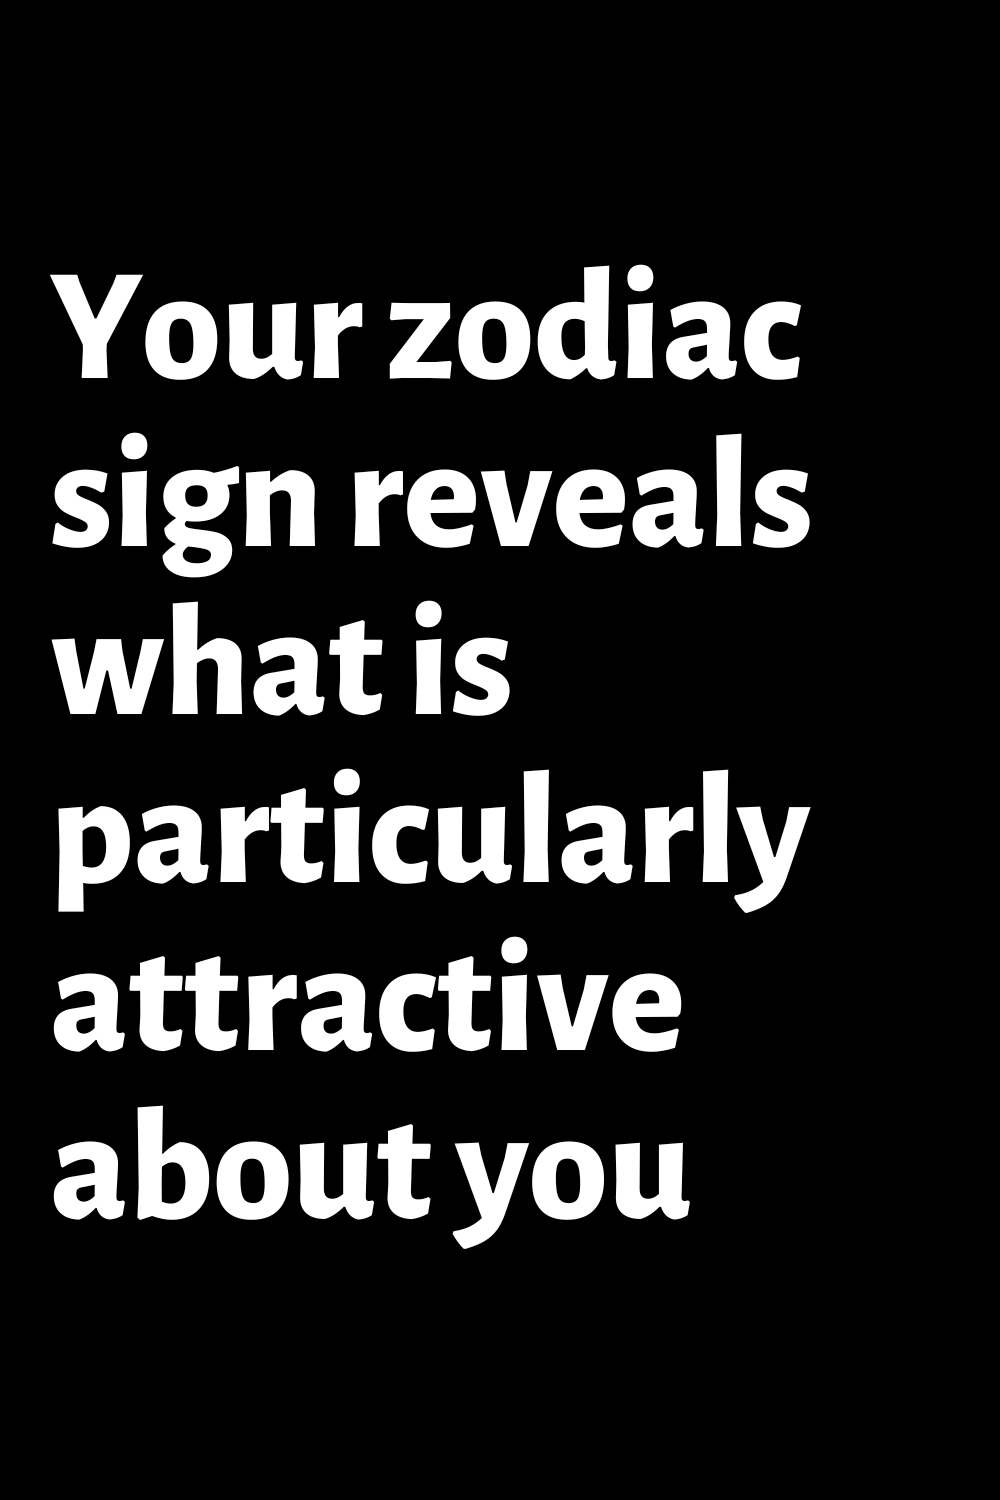 Your zodiac sign reveals what is particularly attractive about you ...